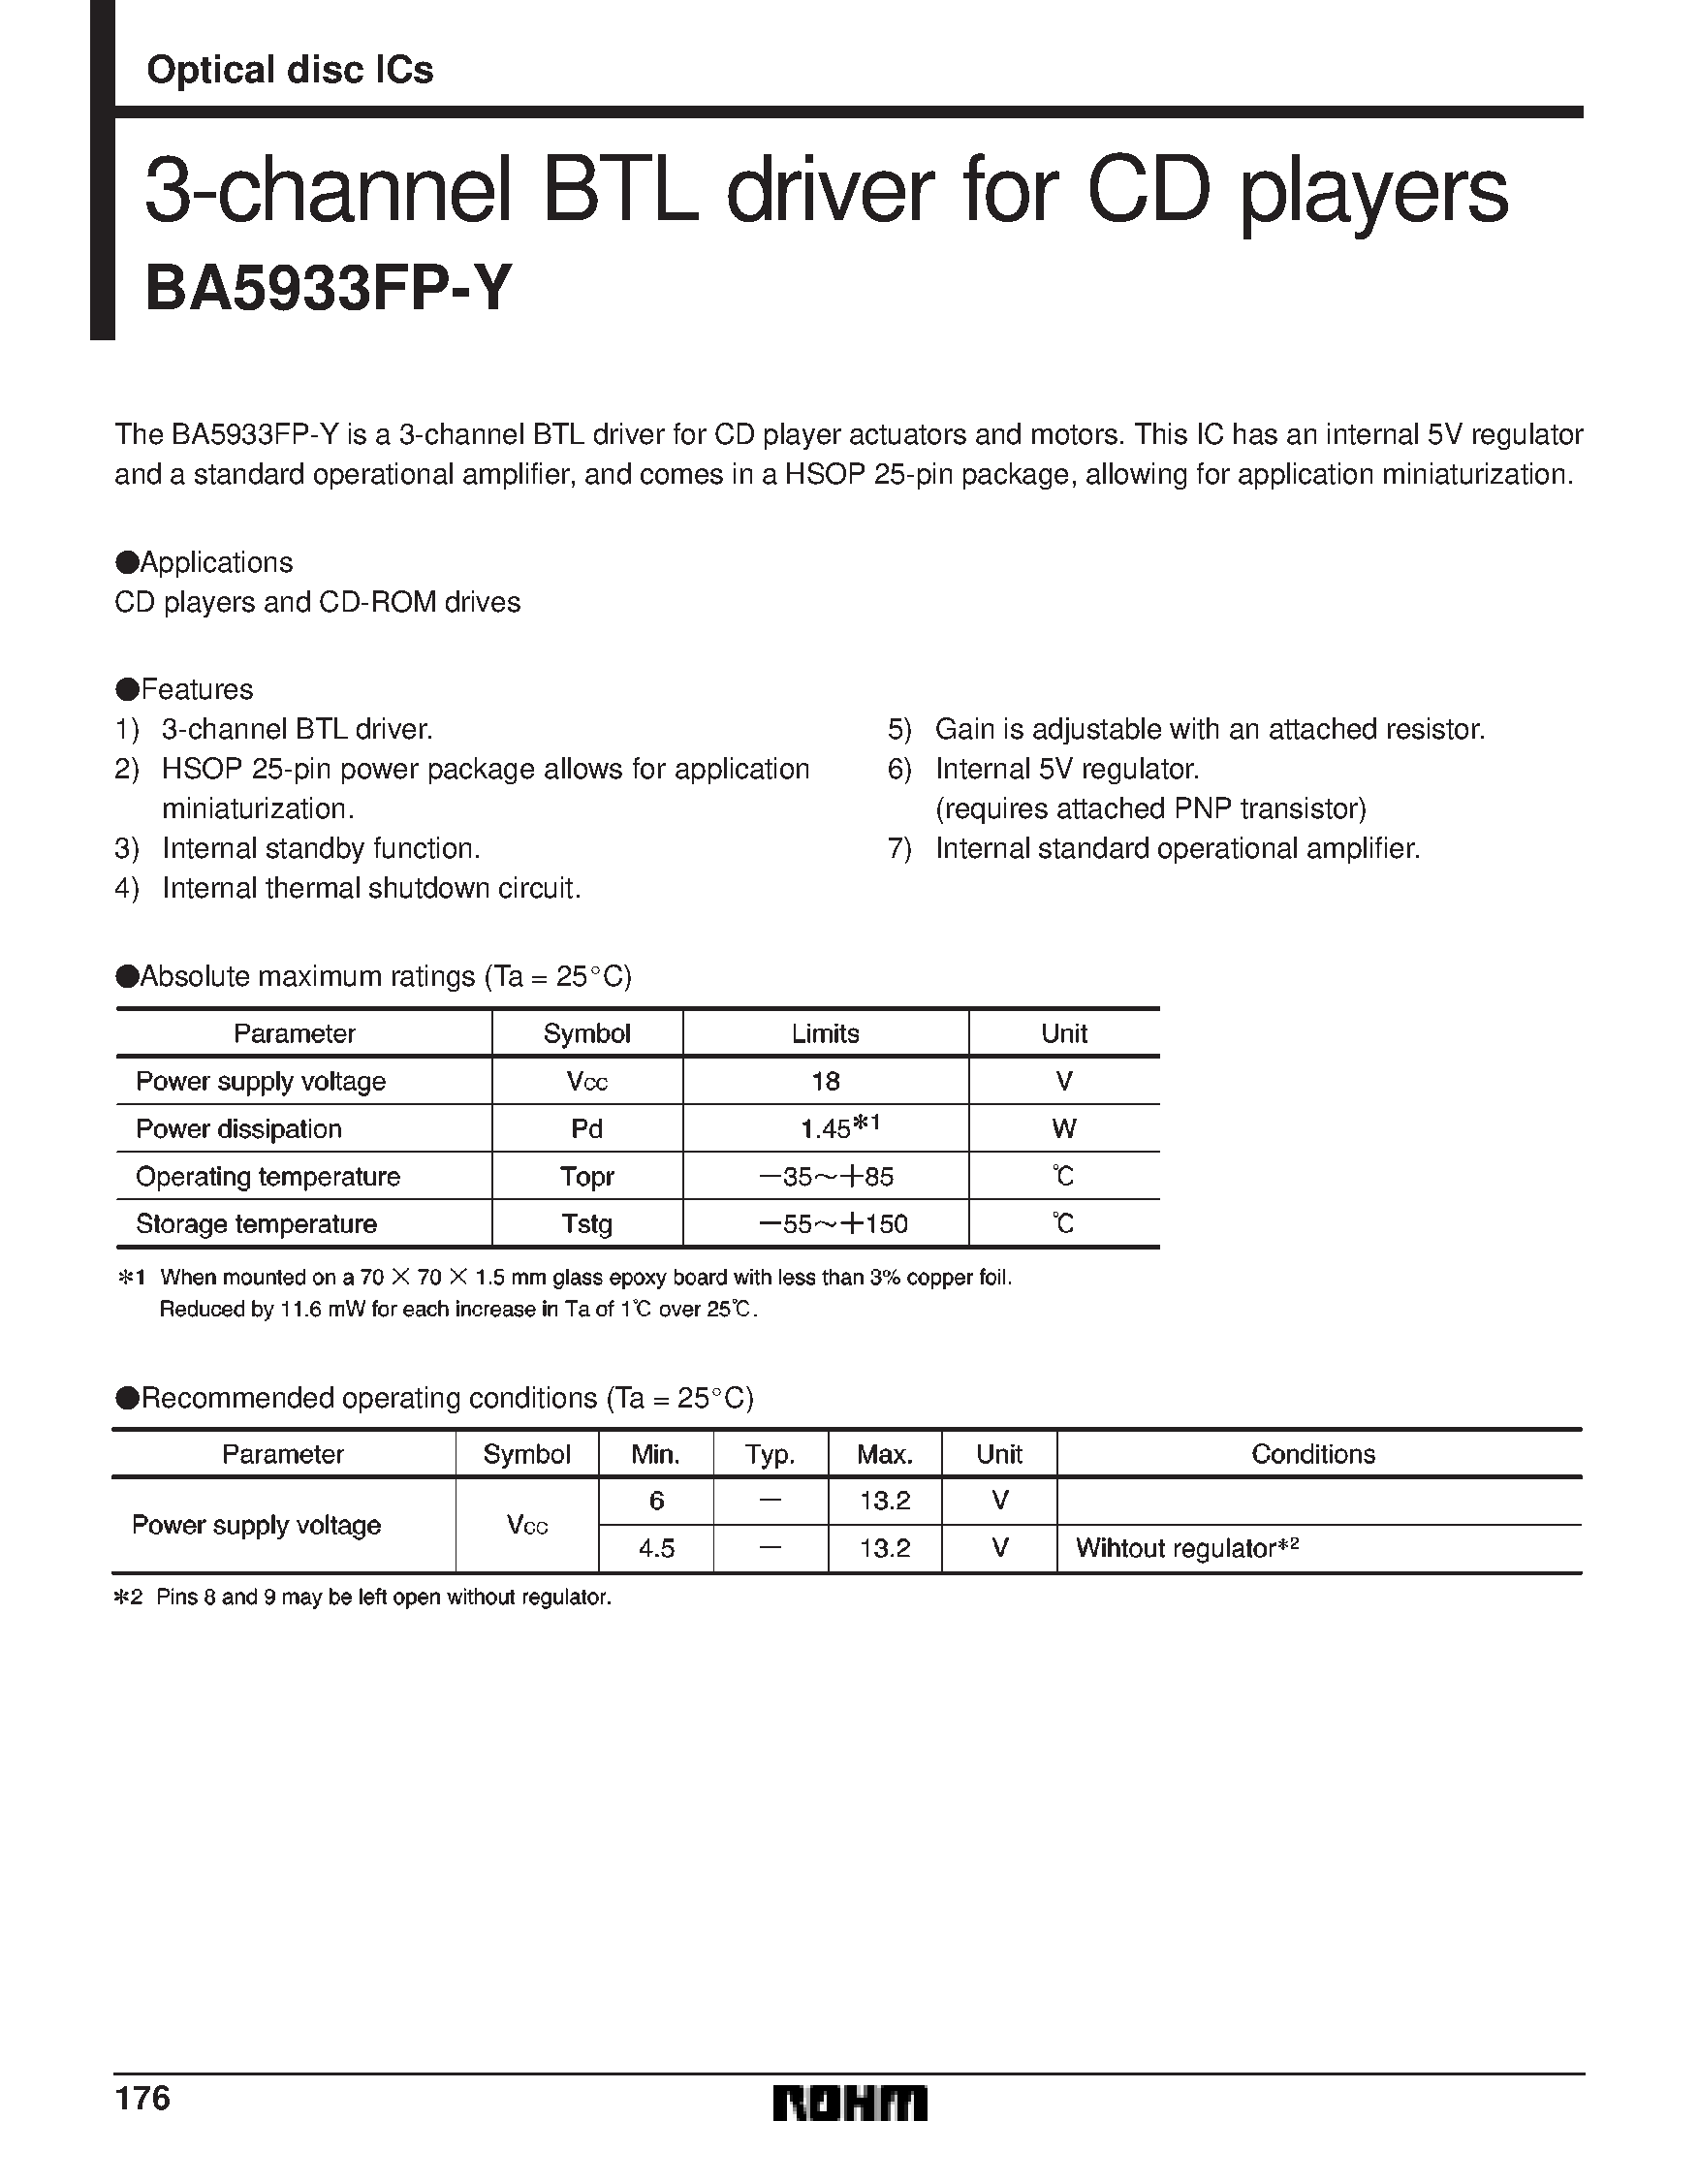 Datasheet BA5933FP-Y - 3-channel BTL driver for CD players page 1